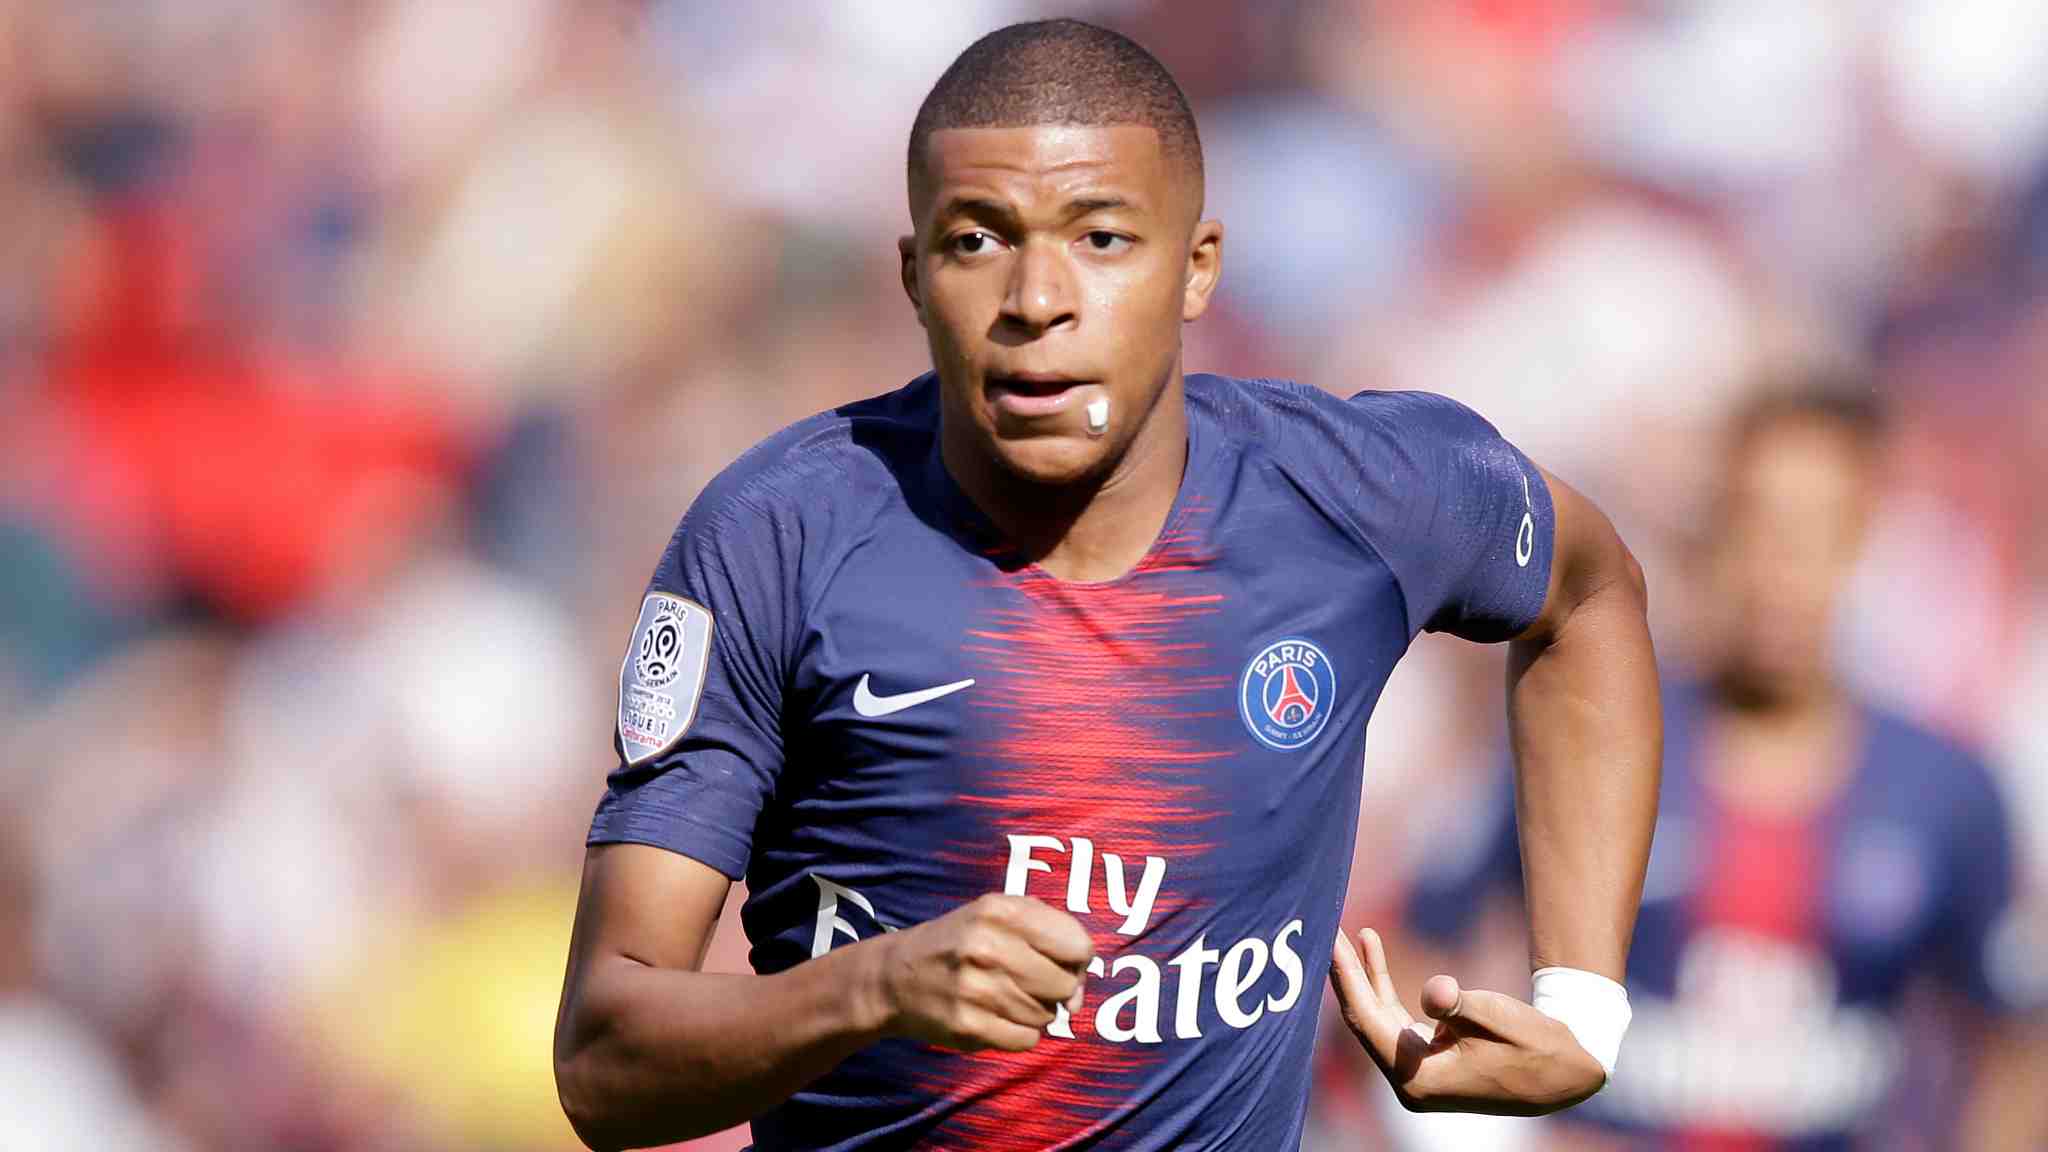 Mbappe Wallpaper World Cup